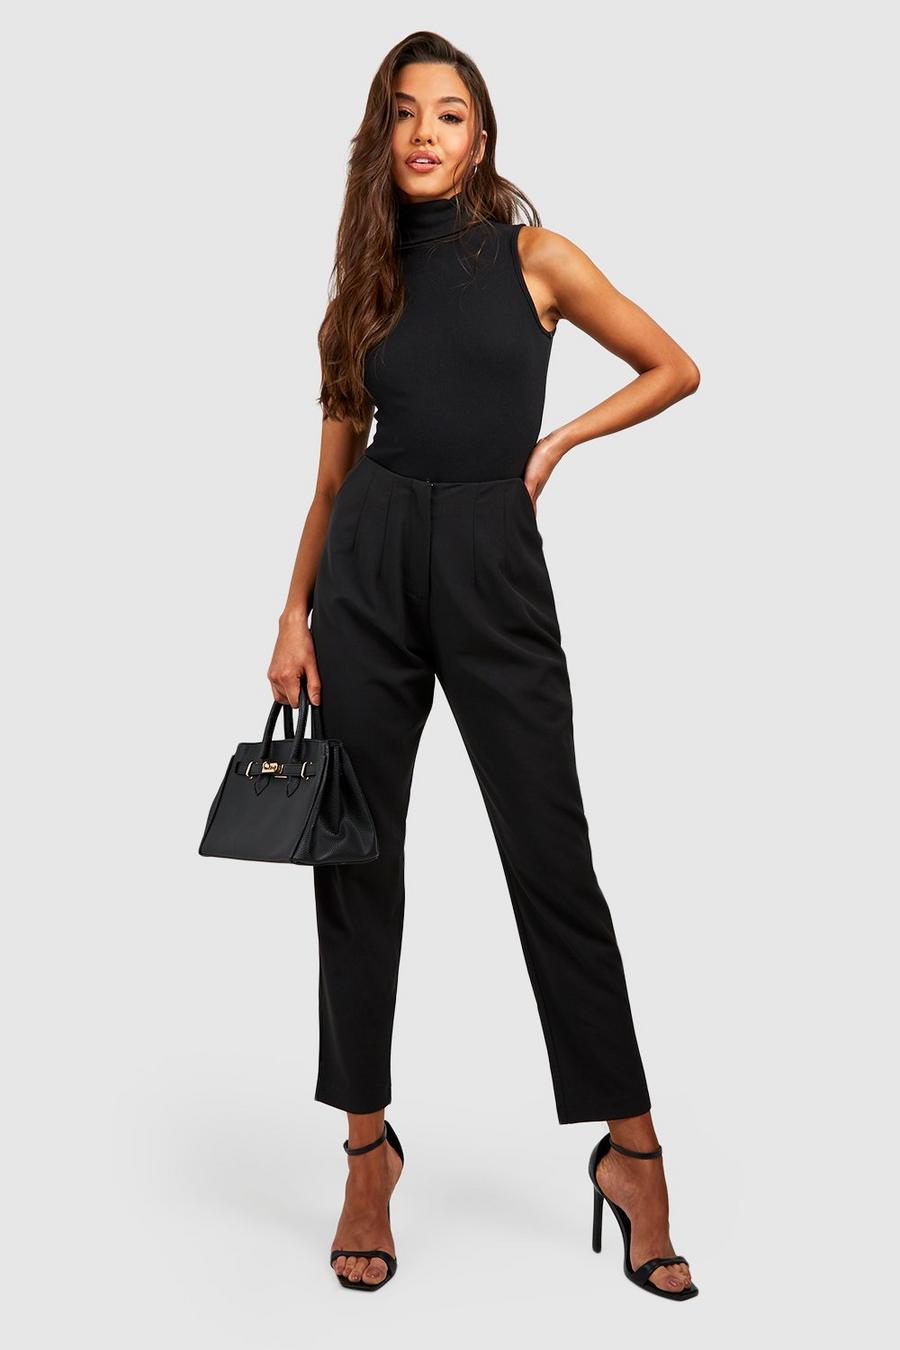 Black High Waisted Tapered Pants